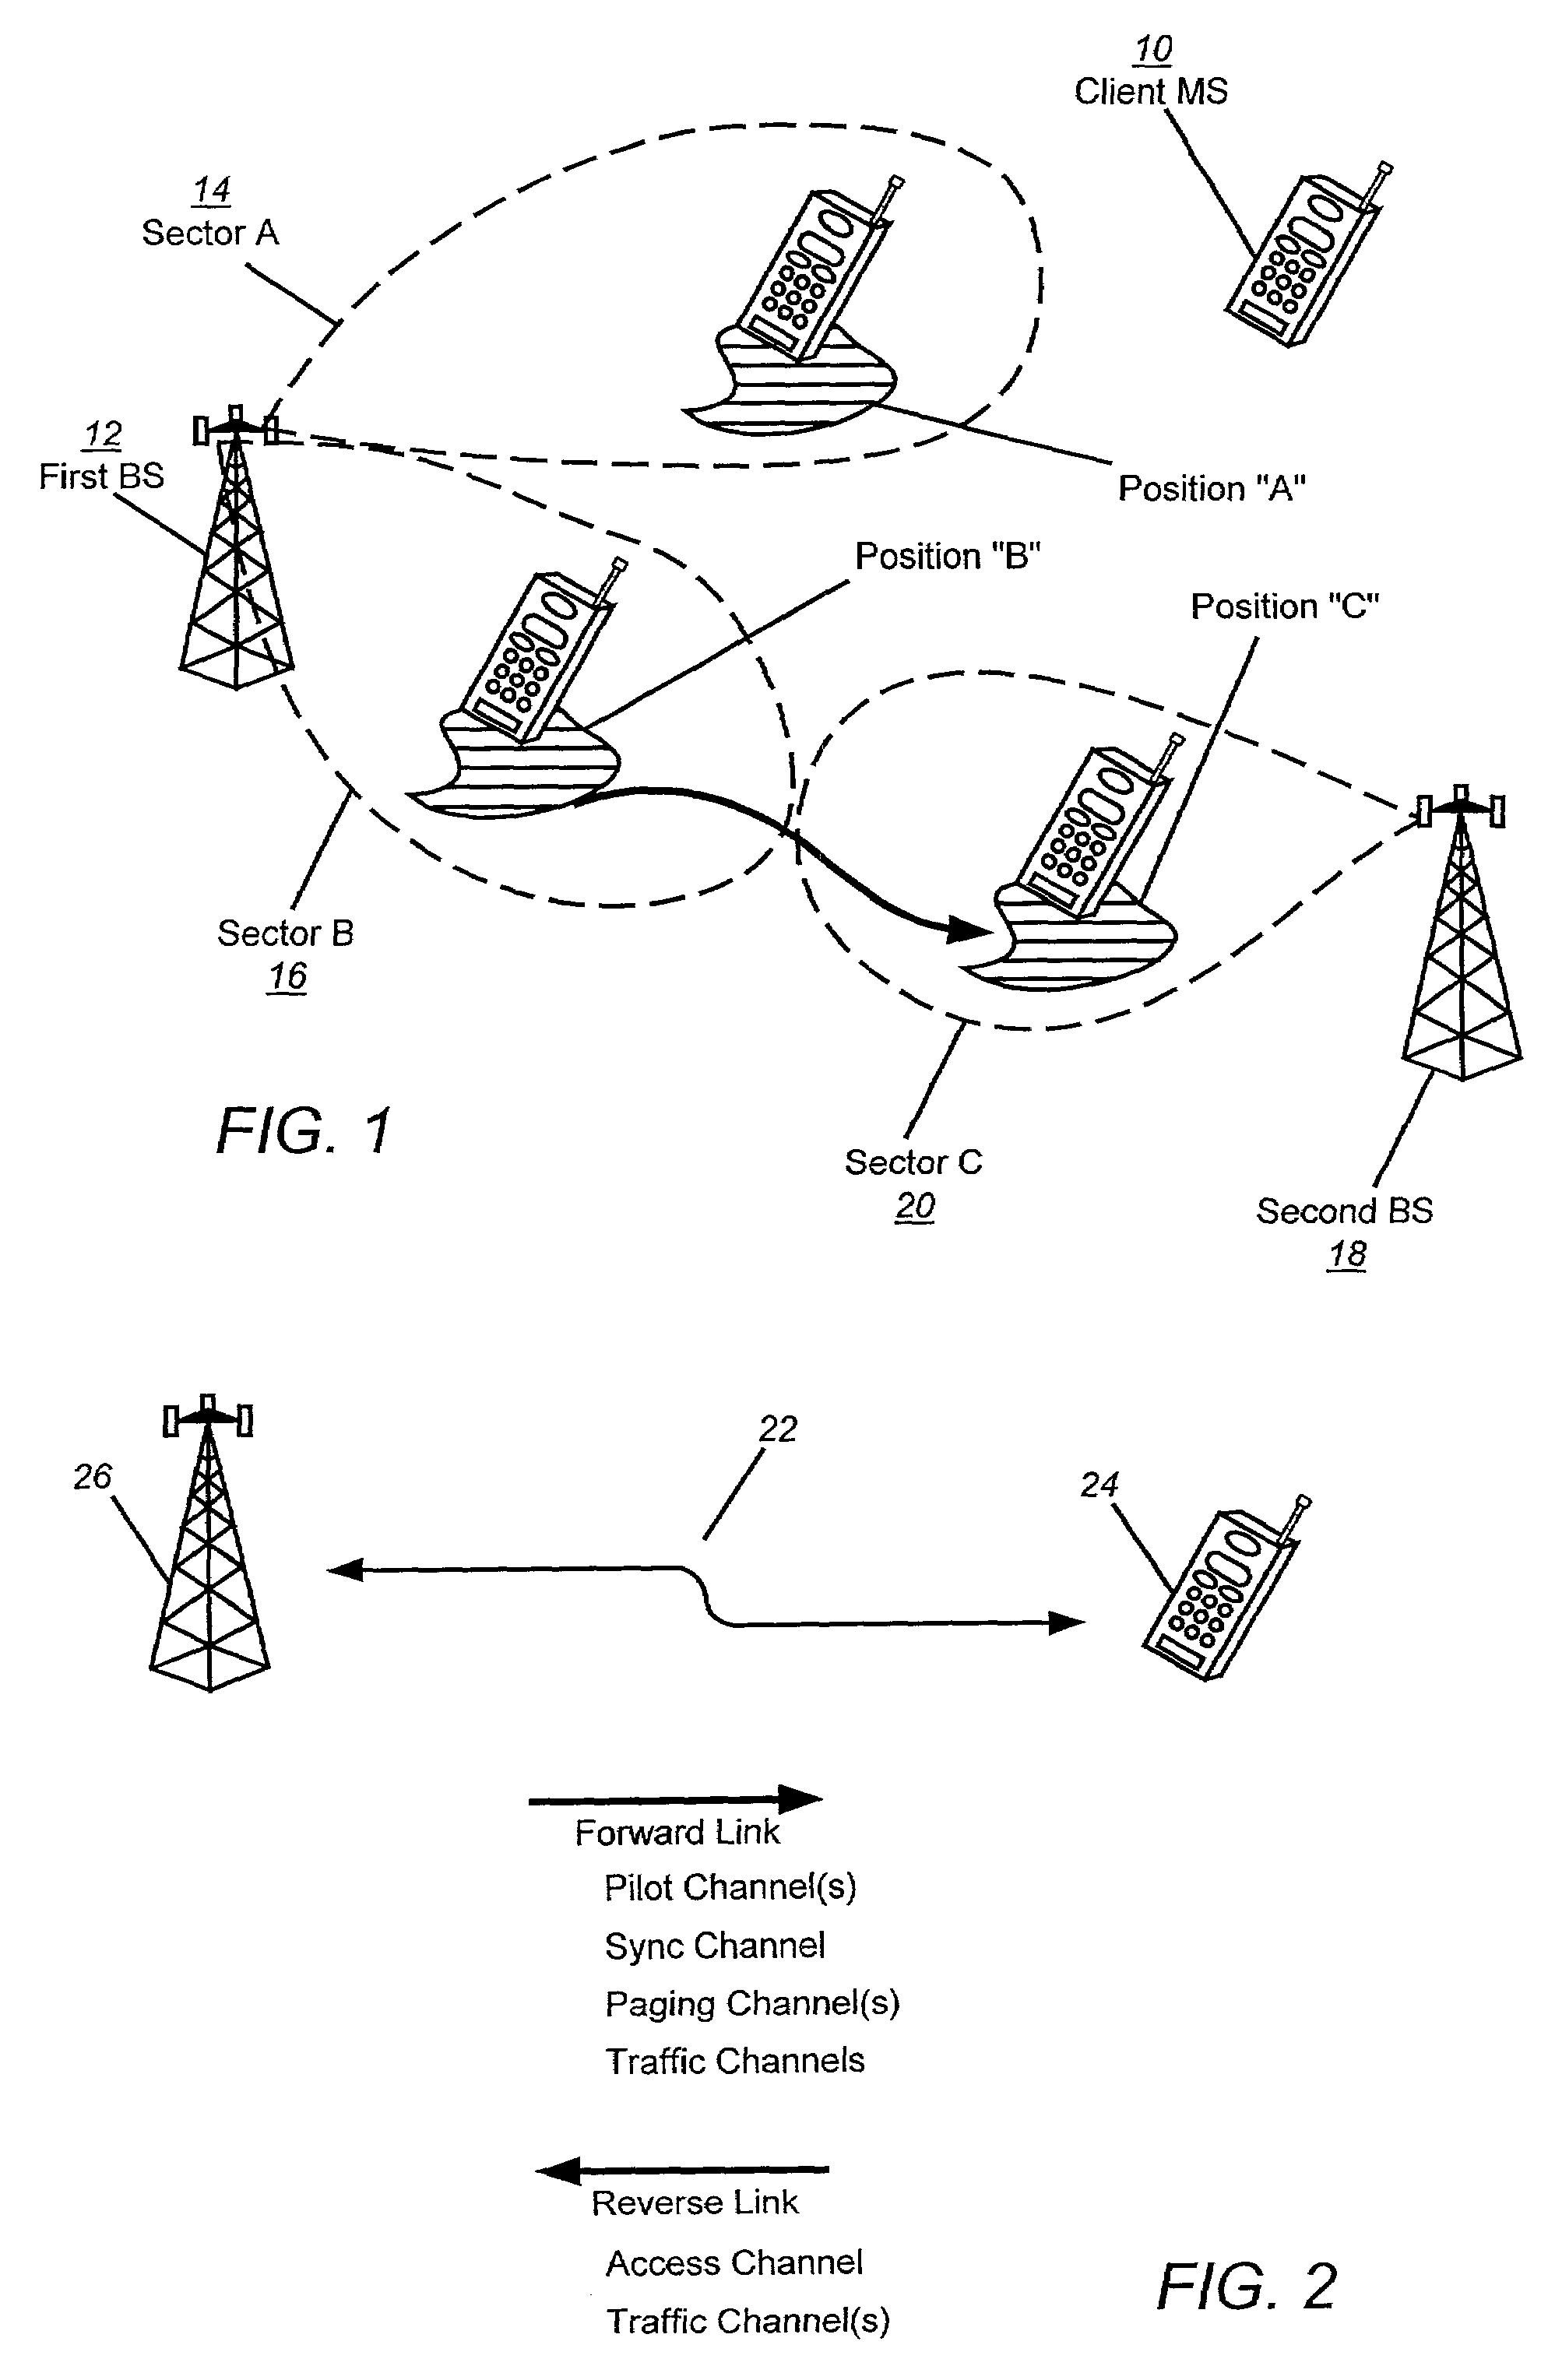 Forward link based rescue channel method and apparatus for telecommunication systems